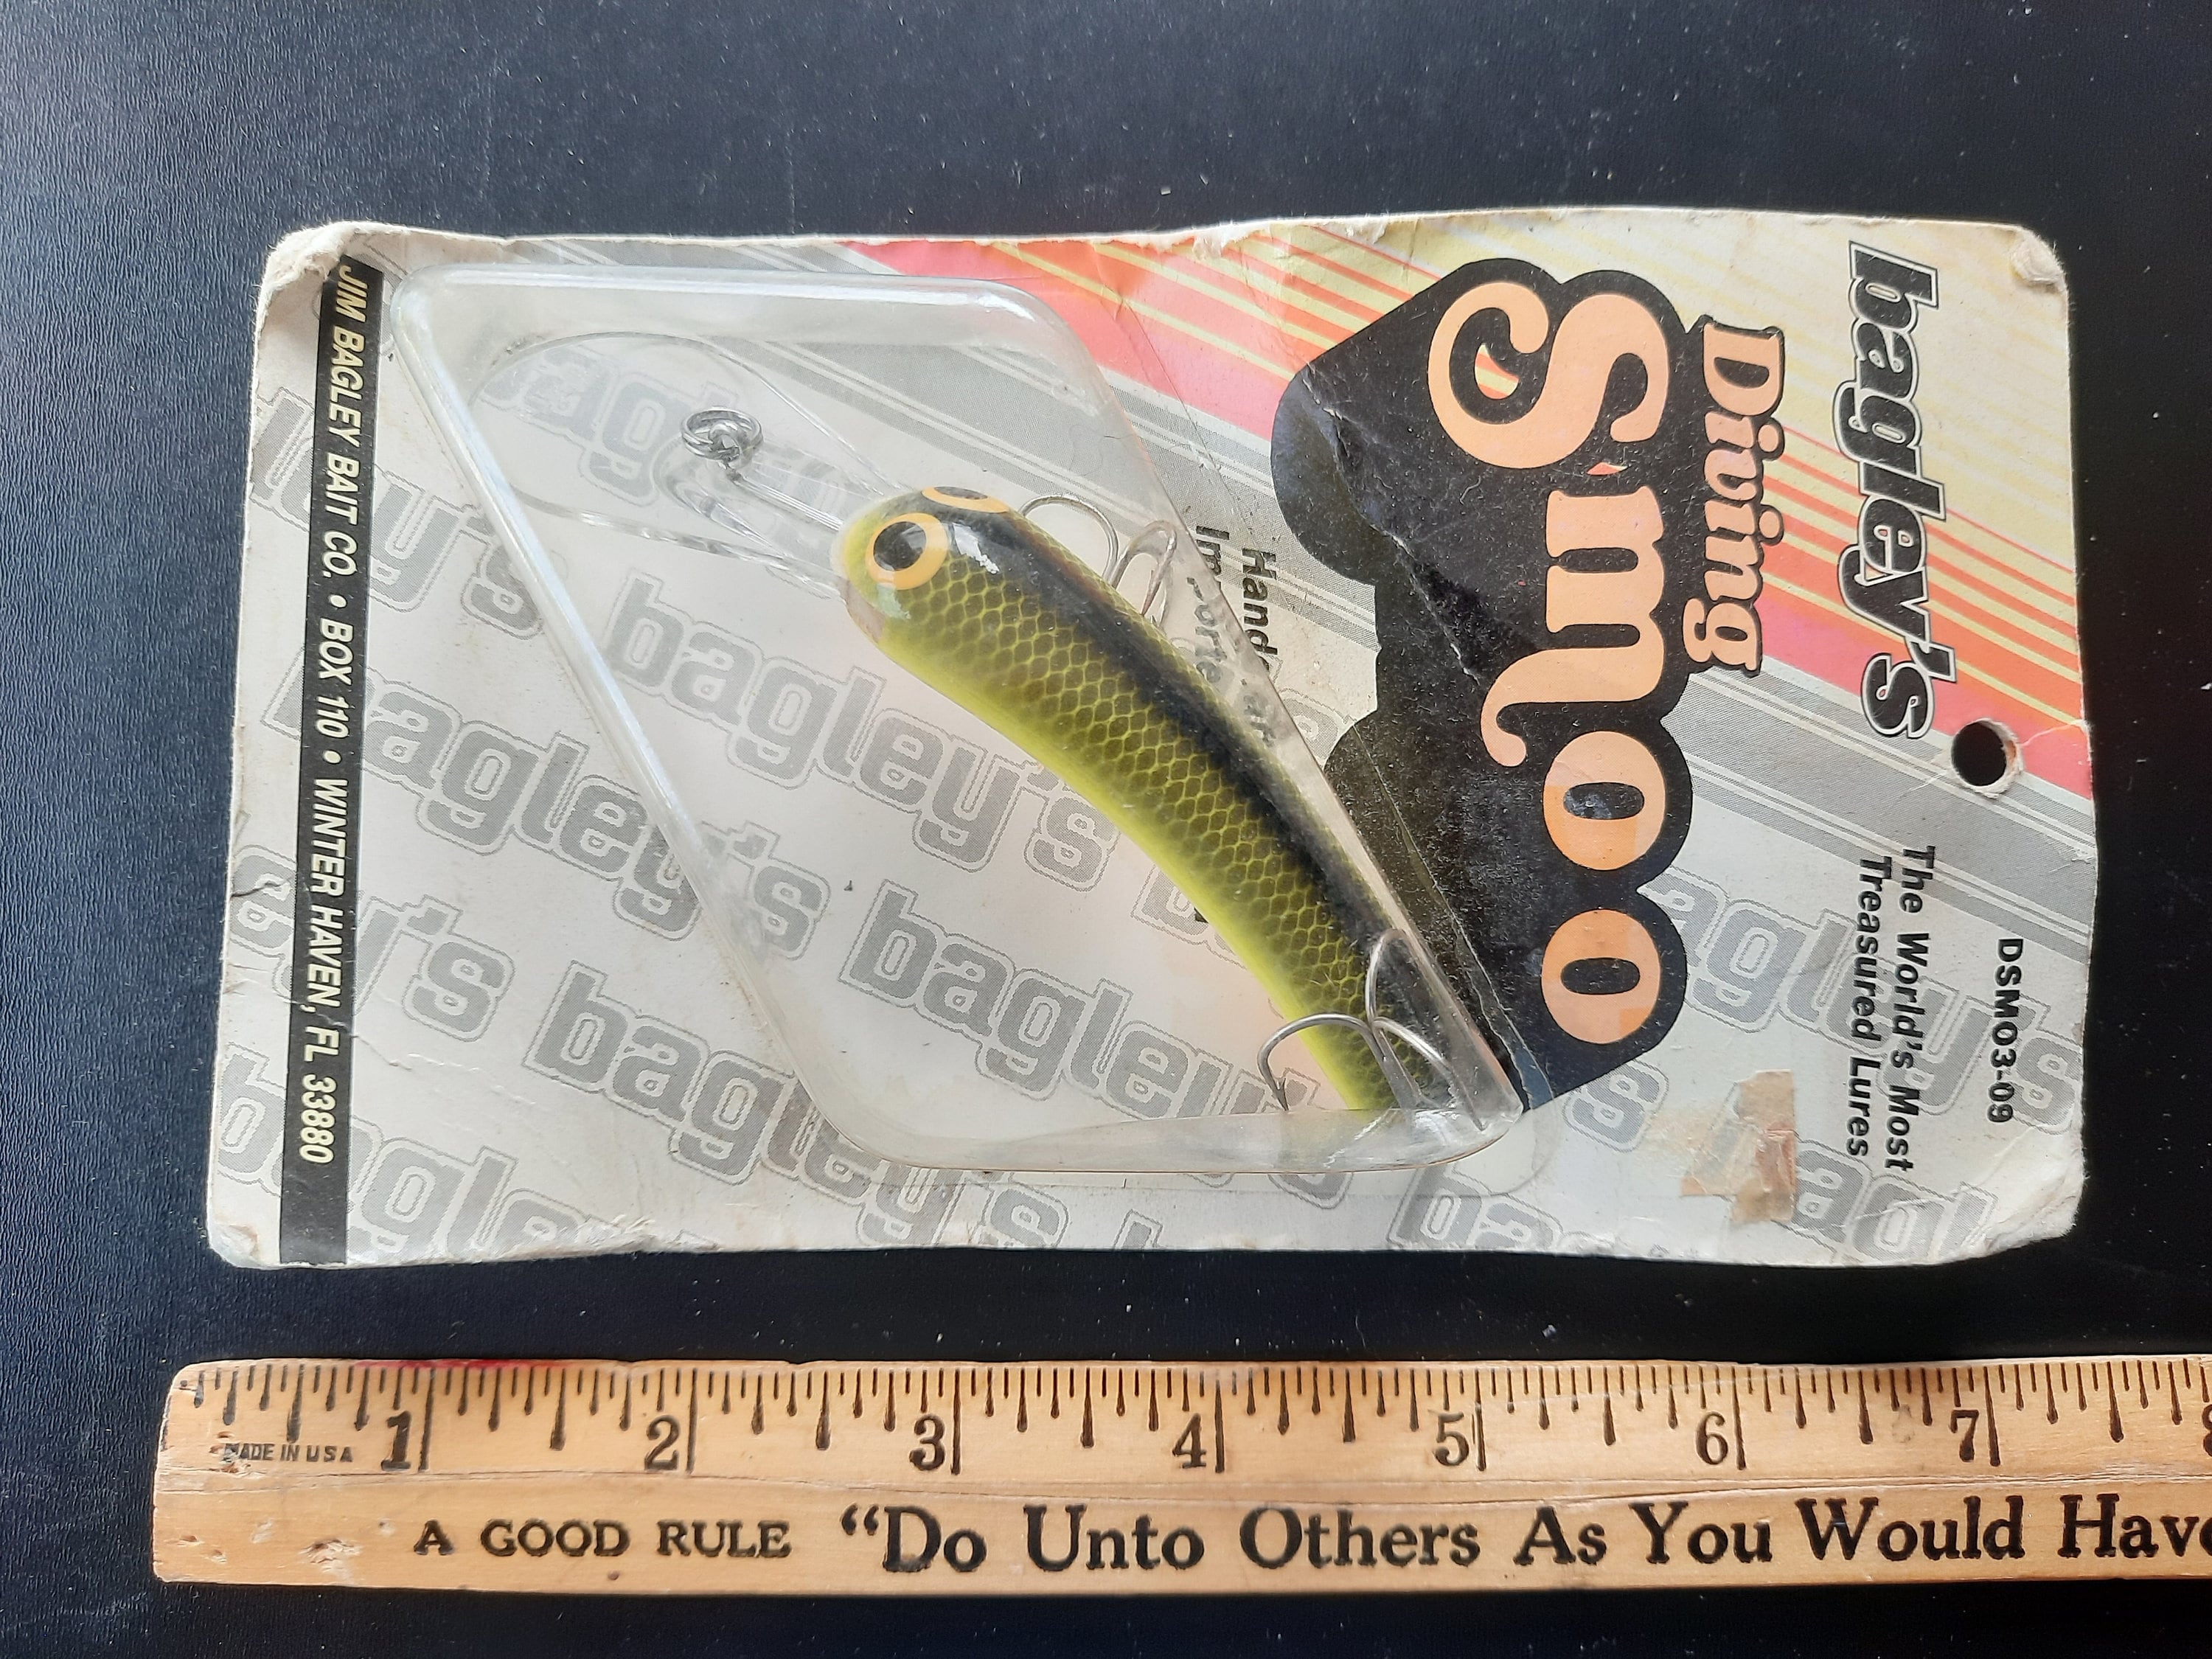 Bagley Bait Company - Old Florida Lures